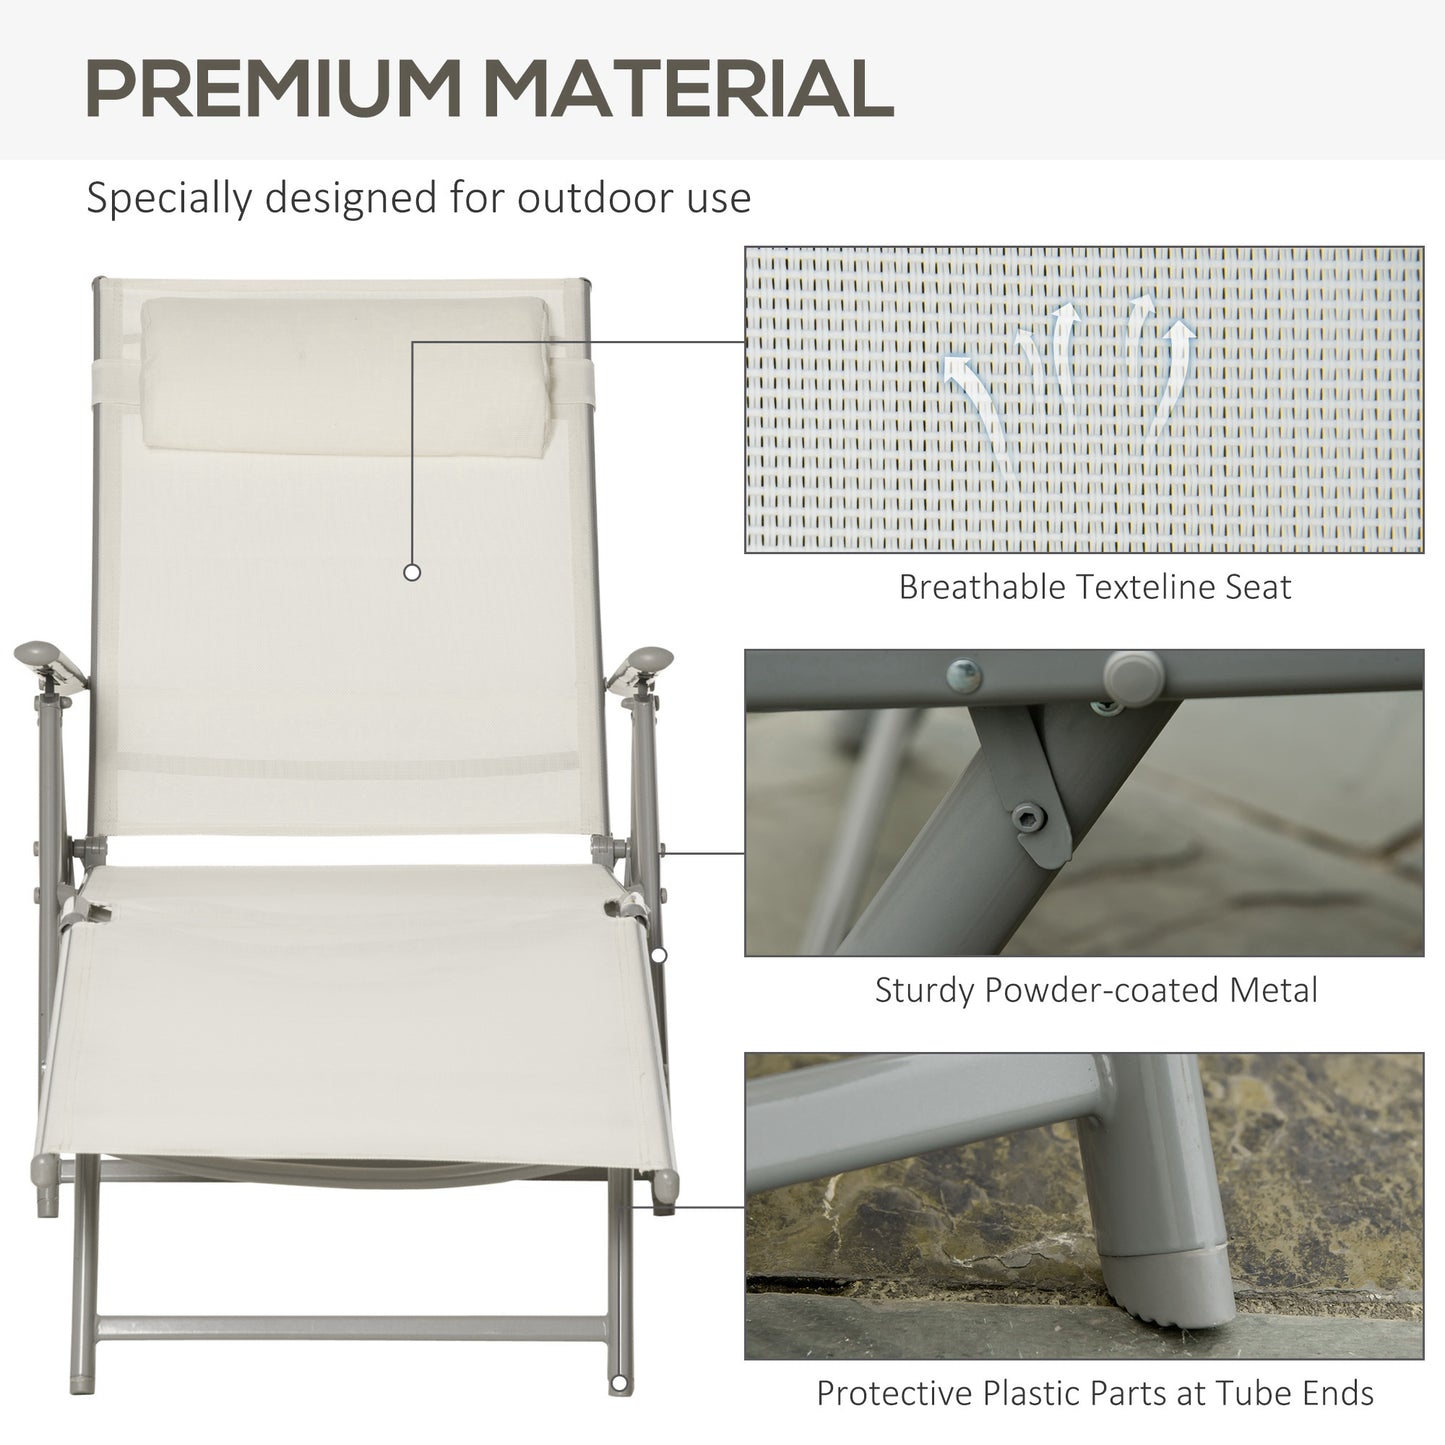 Outsunny Garden Sun Lounger: Foldable Reclining Chair with Pillow, Texteline Fabric, Adjustable Backrest, Cream White